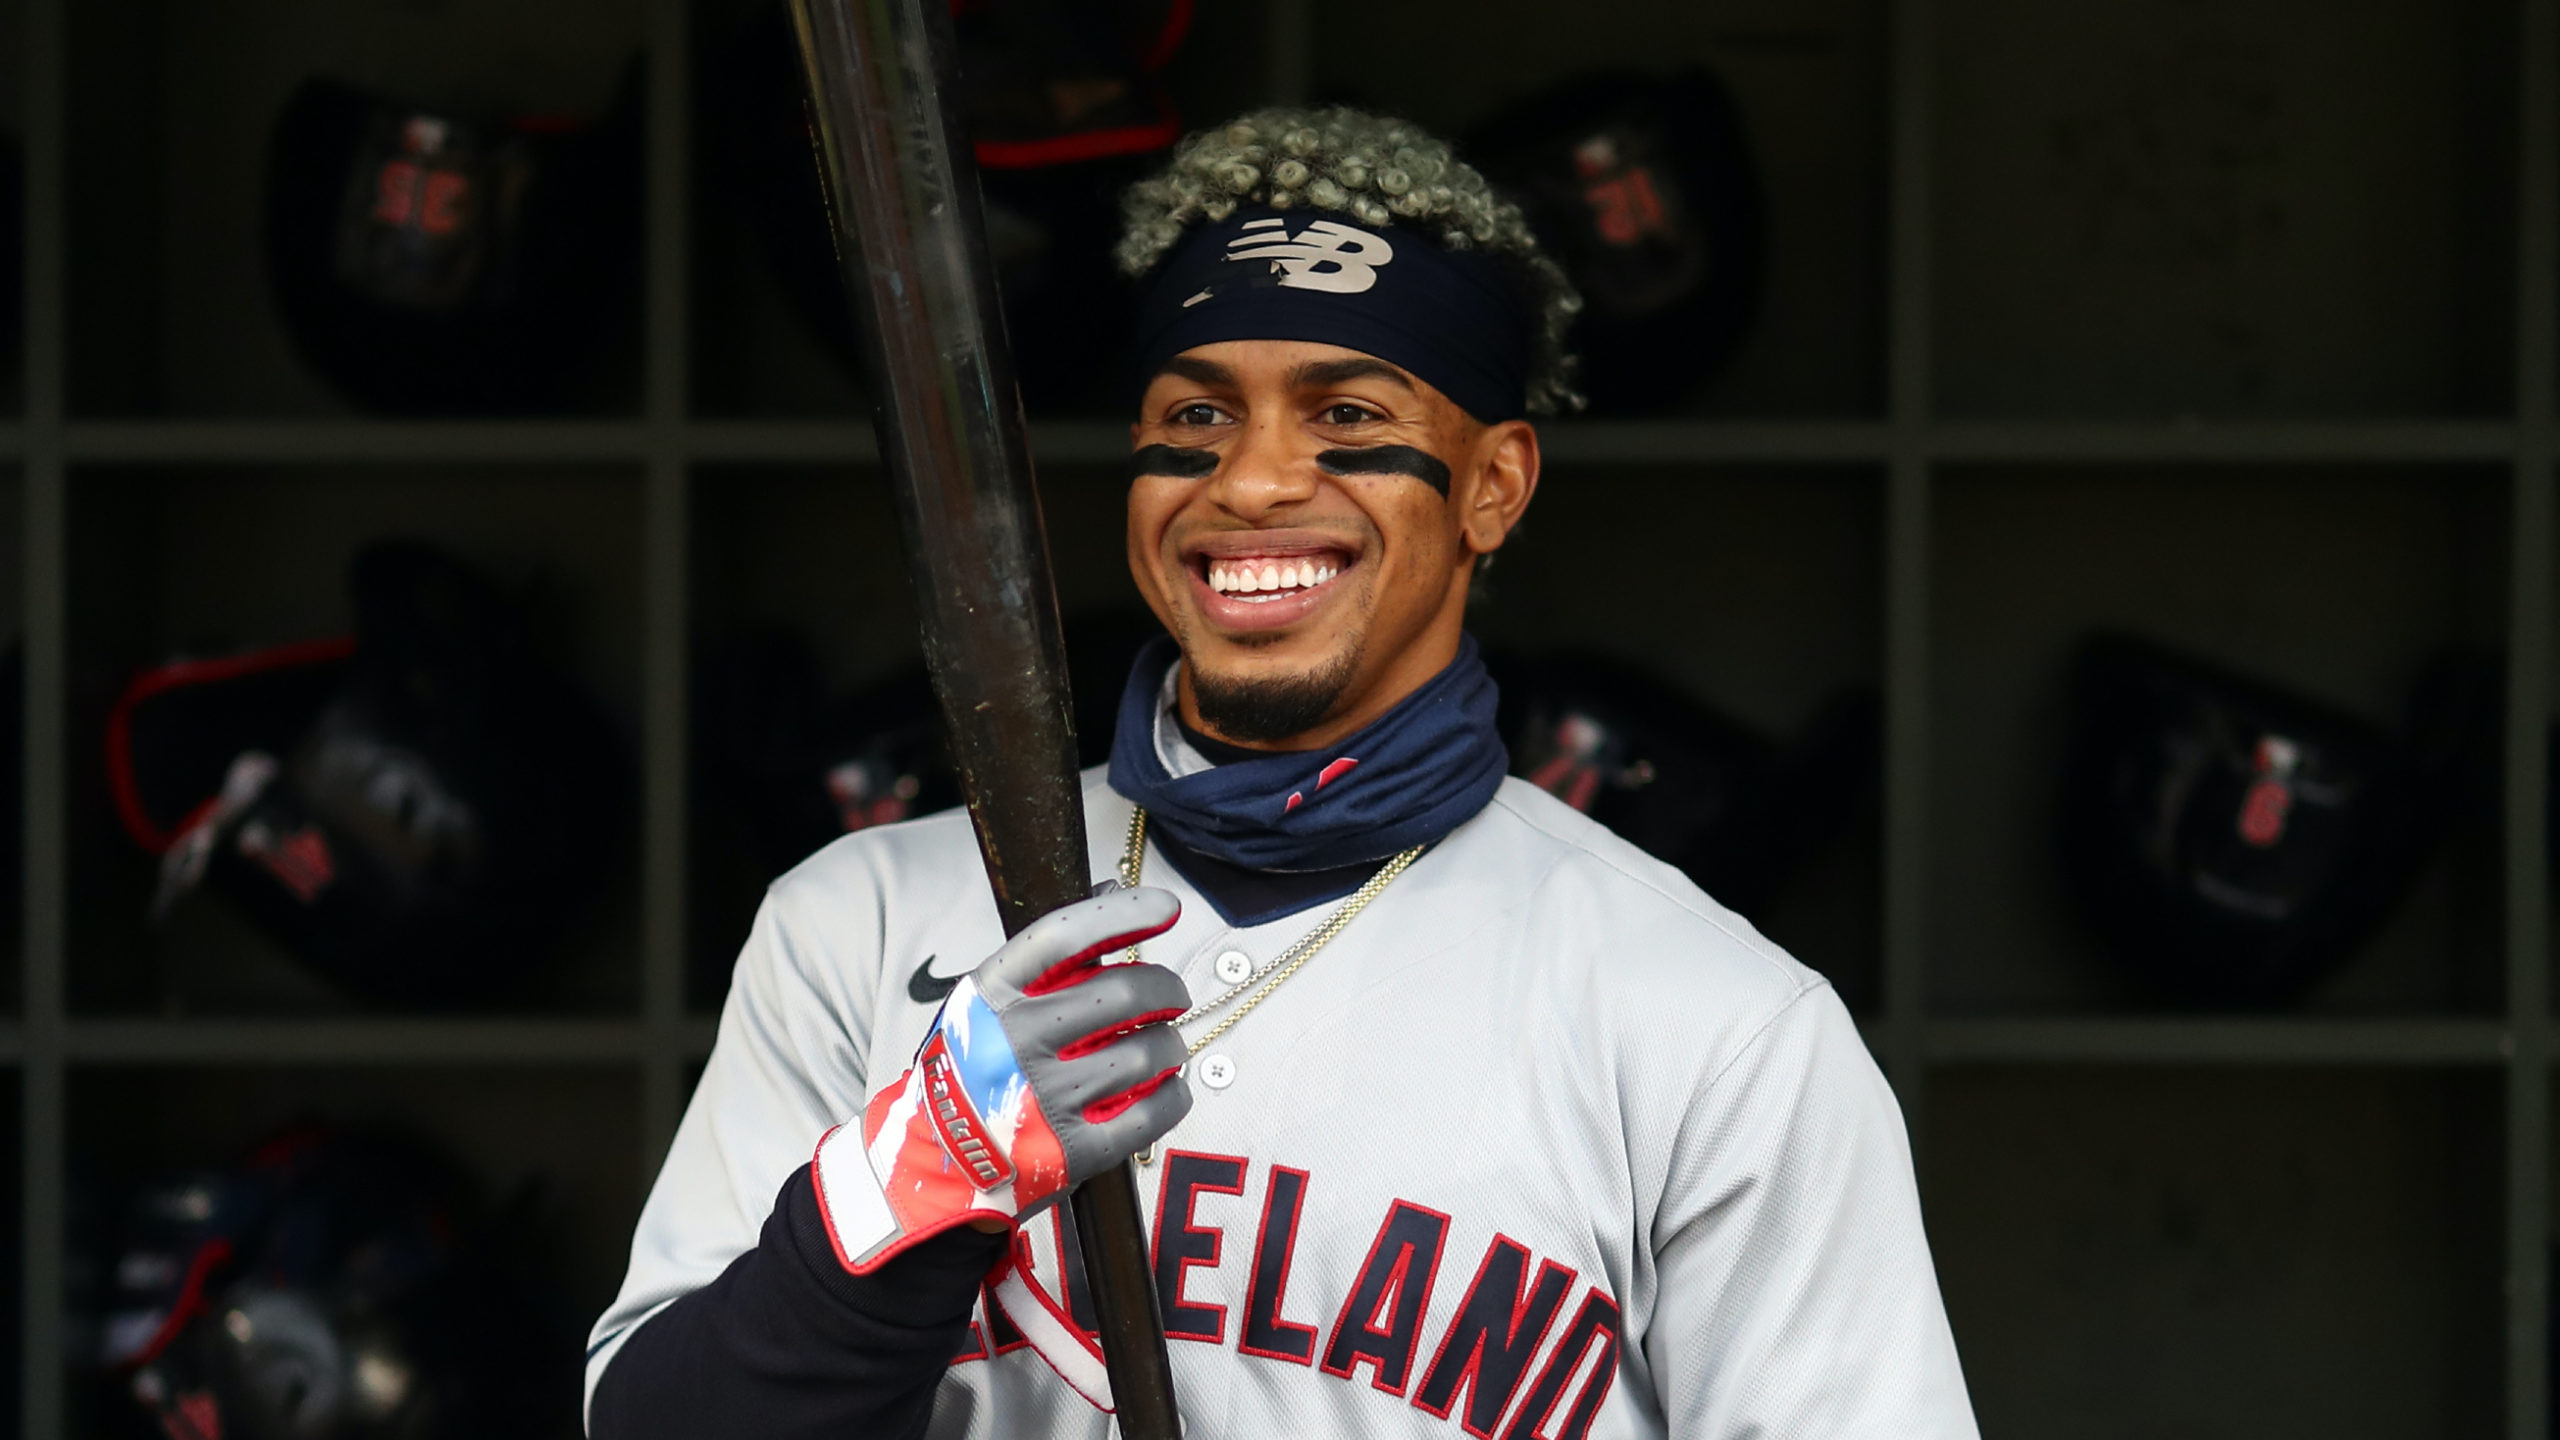 Rovell: Francisco Lindor Trade Makes Mets Top Liability at Many Sportsbooks article feature image